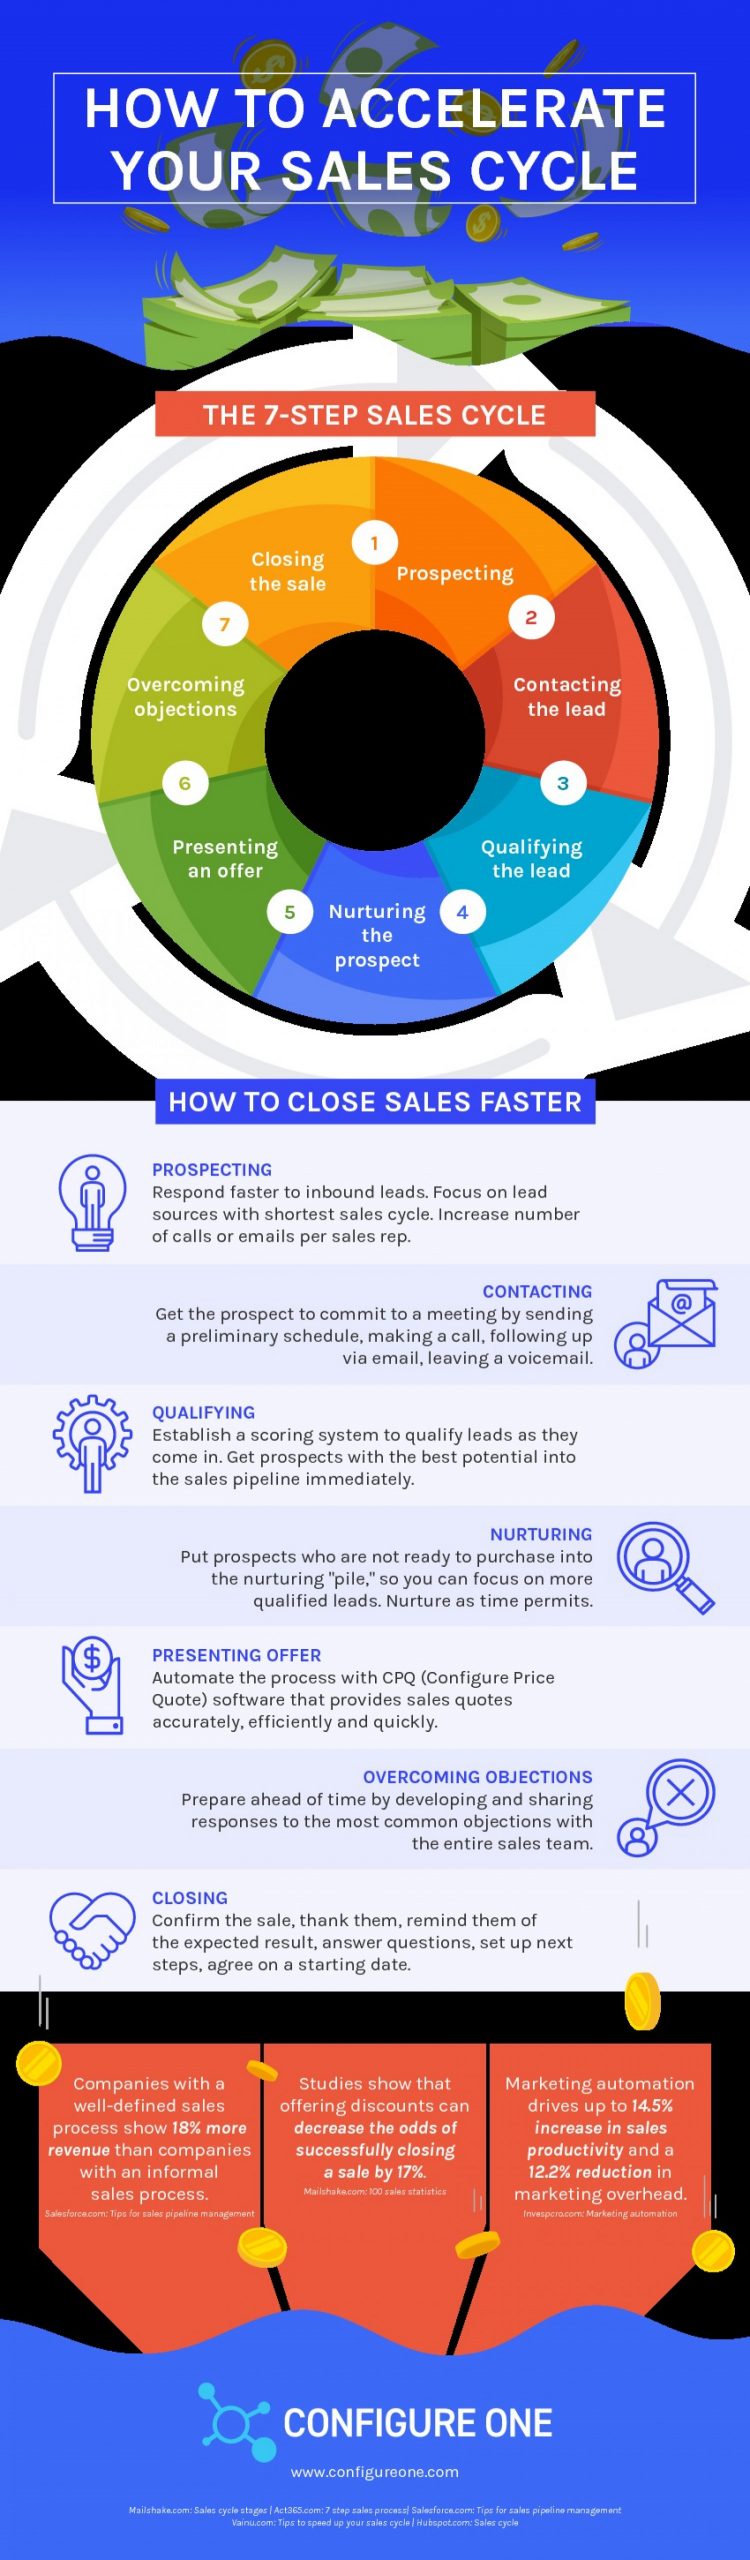 How to close sales faster using the 7 step sales cycle